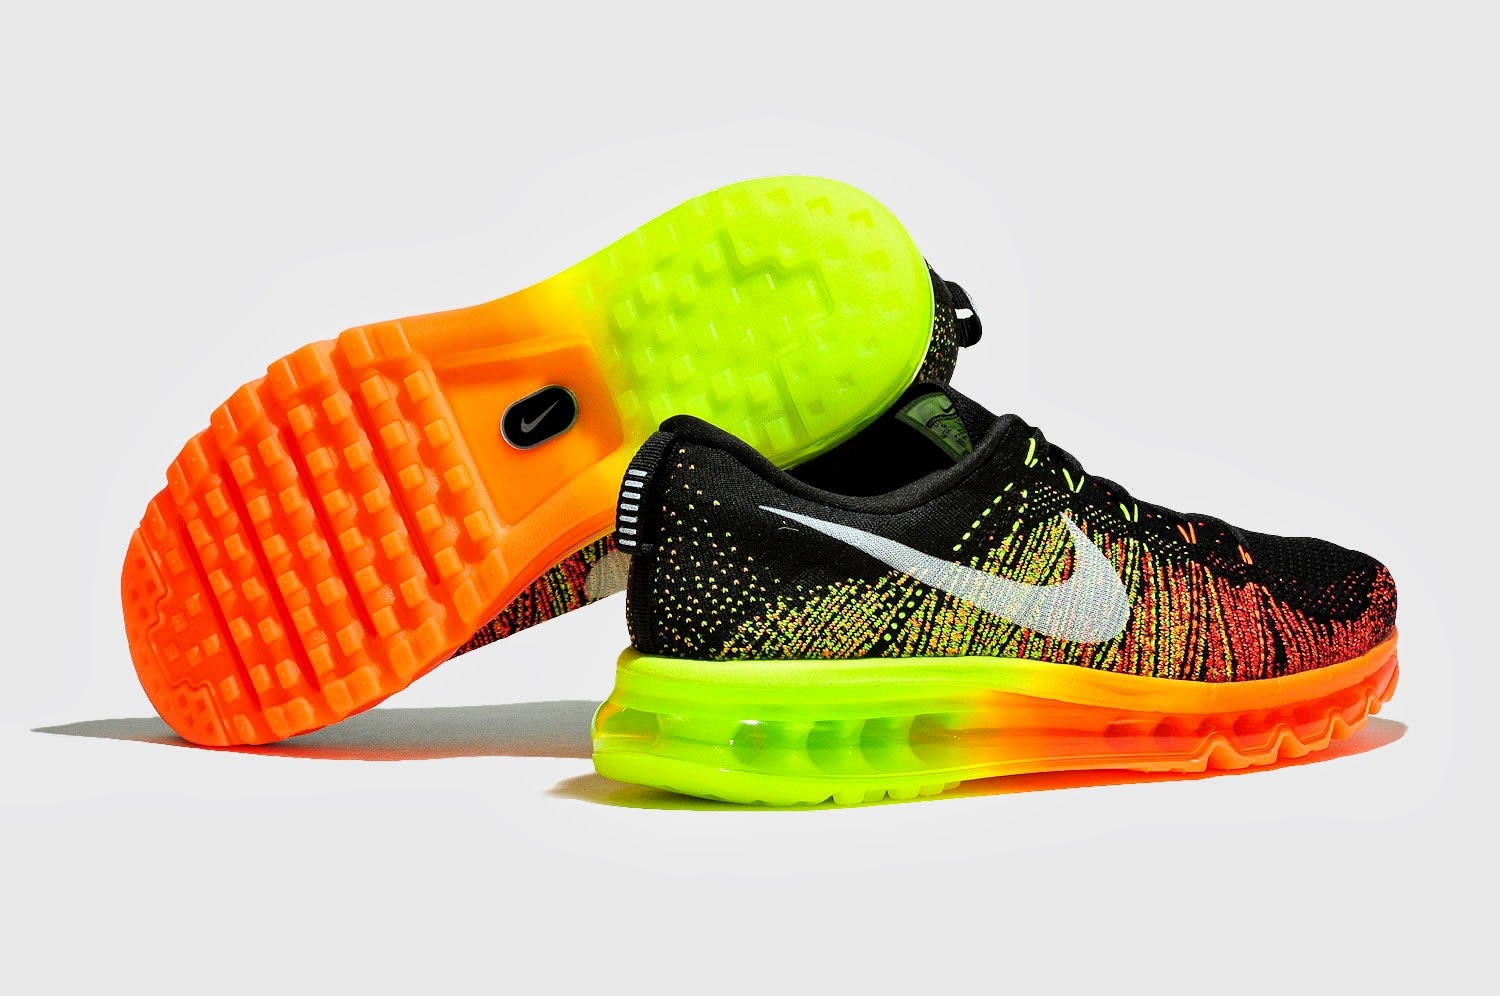  nike flyknit air max hd wallpaper for desktop backgrounds this nike